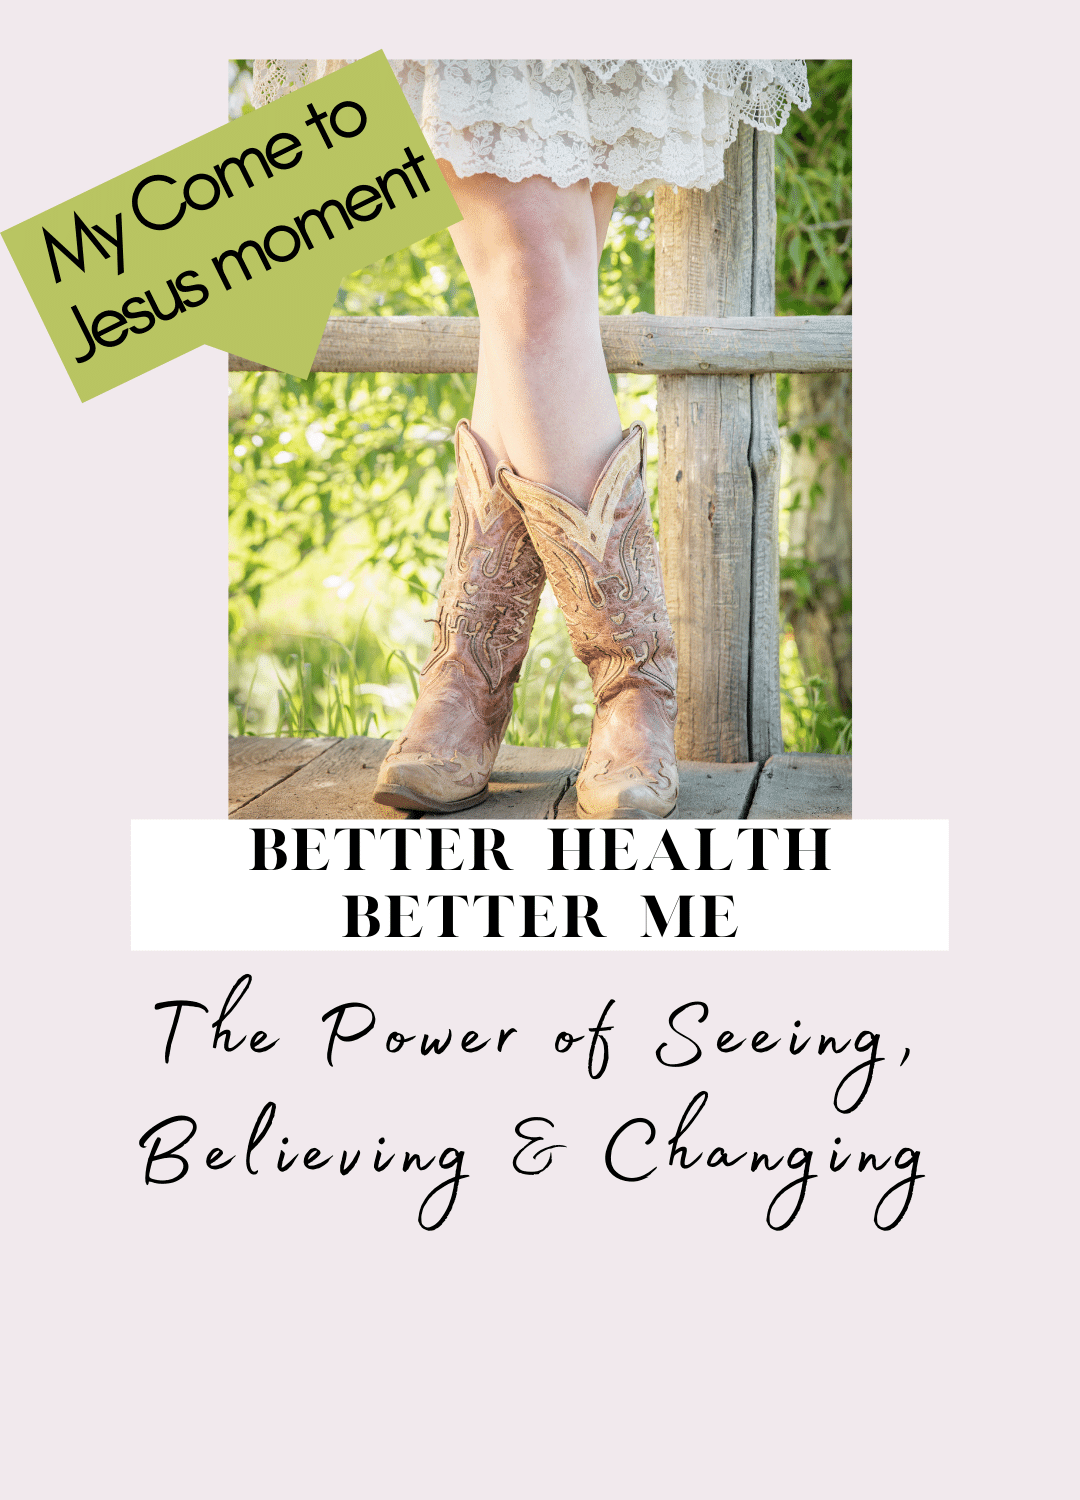 The Power of Seeing, Believing & Changing 